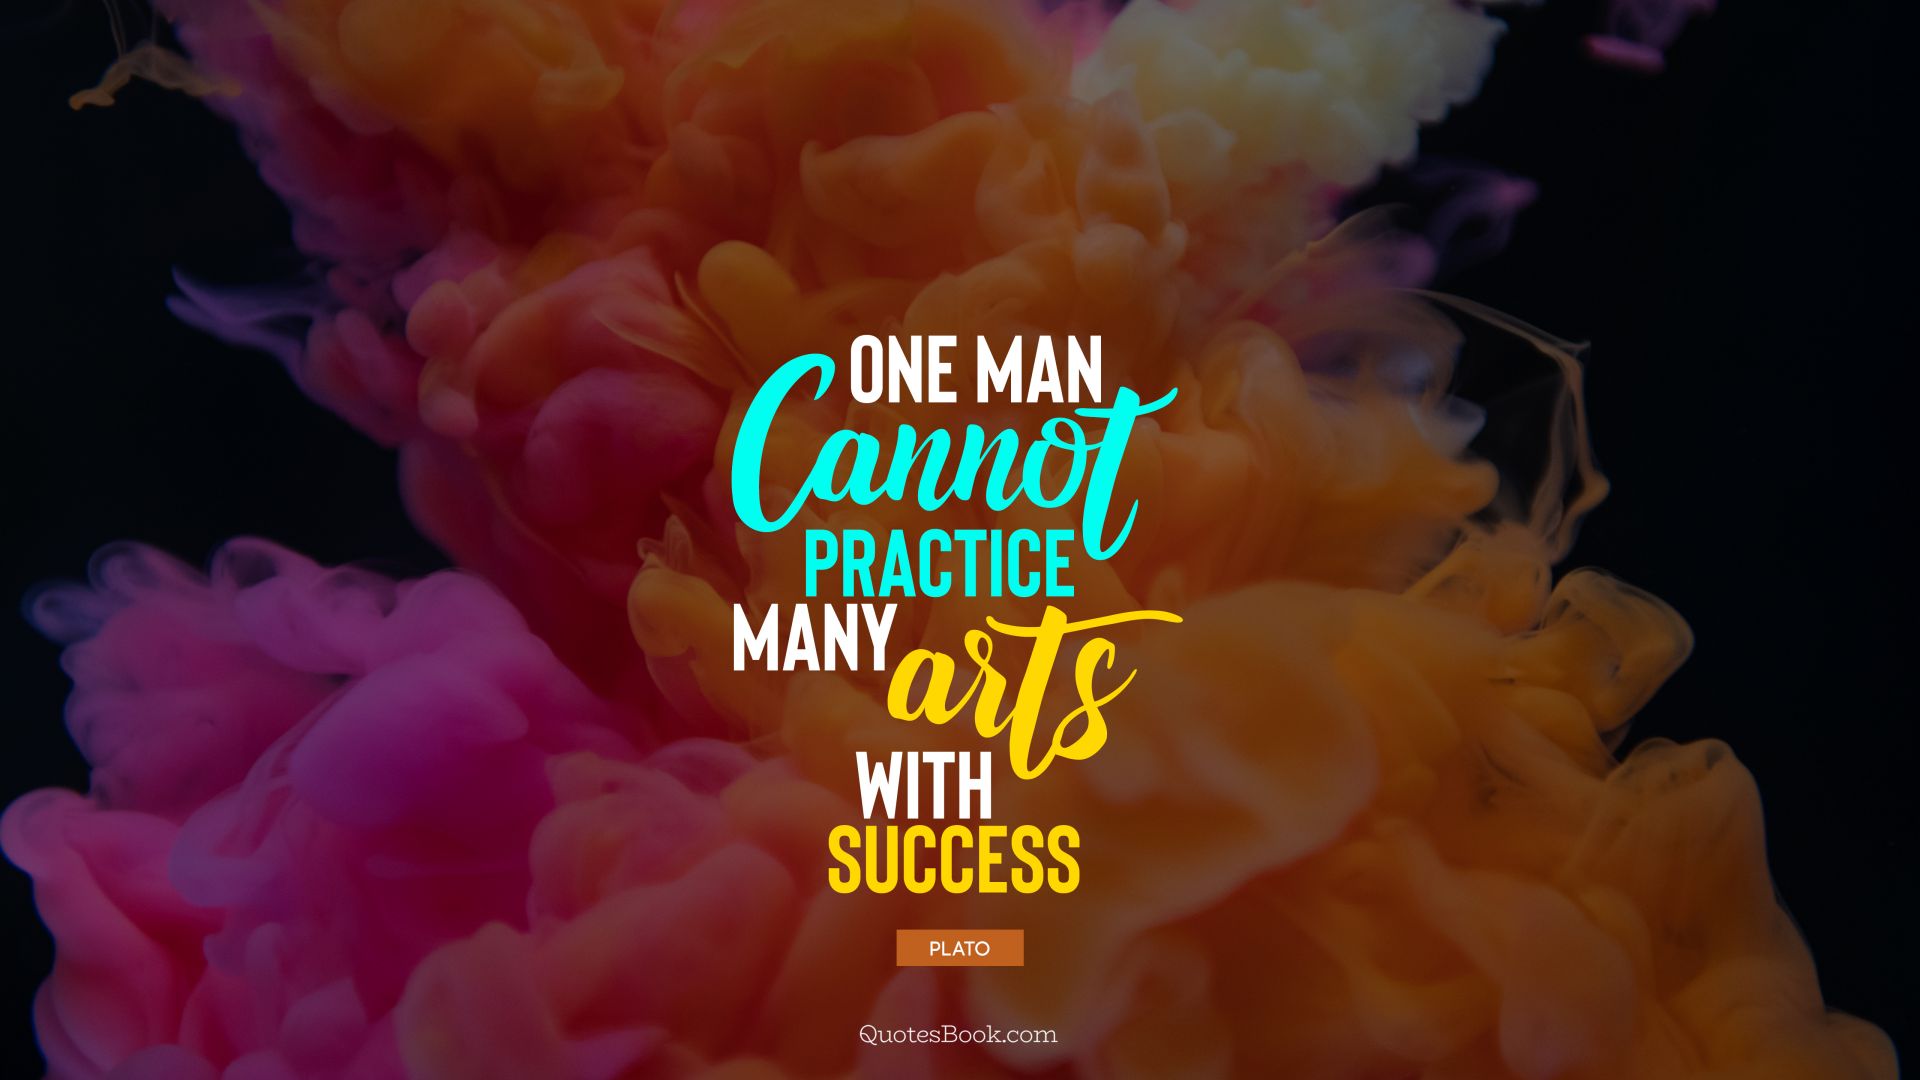 One man cannot practice many arts with success. - Quote by Plato